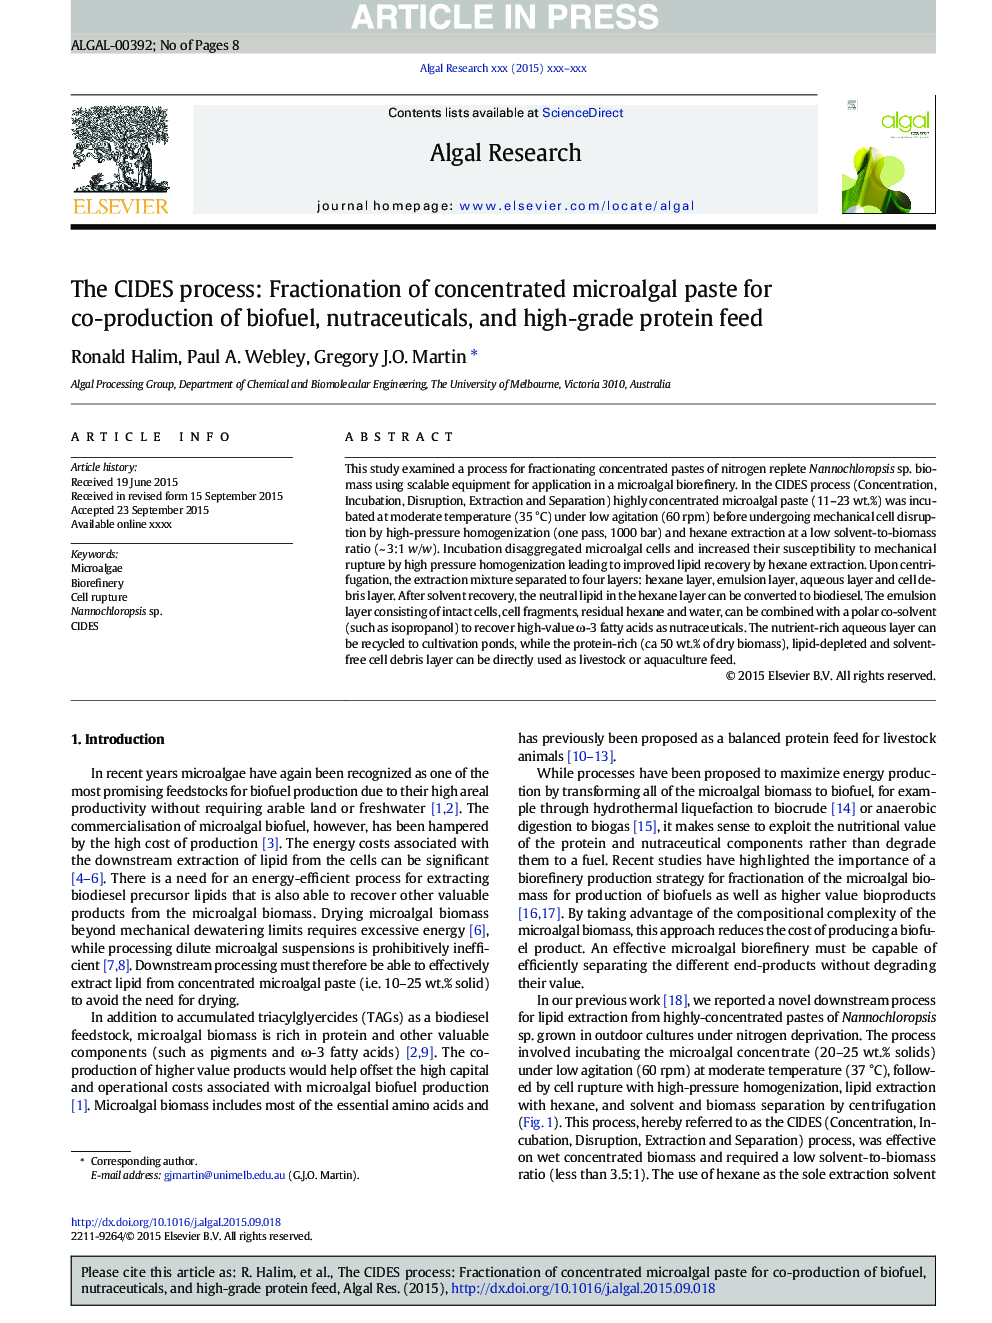 The CIDES process: Fractionation of concentrated microalgal paste for co-production of biofuel, nutraceuticals, and high-grade protein feed